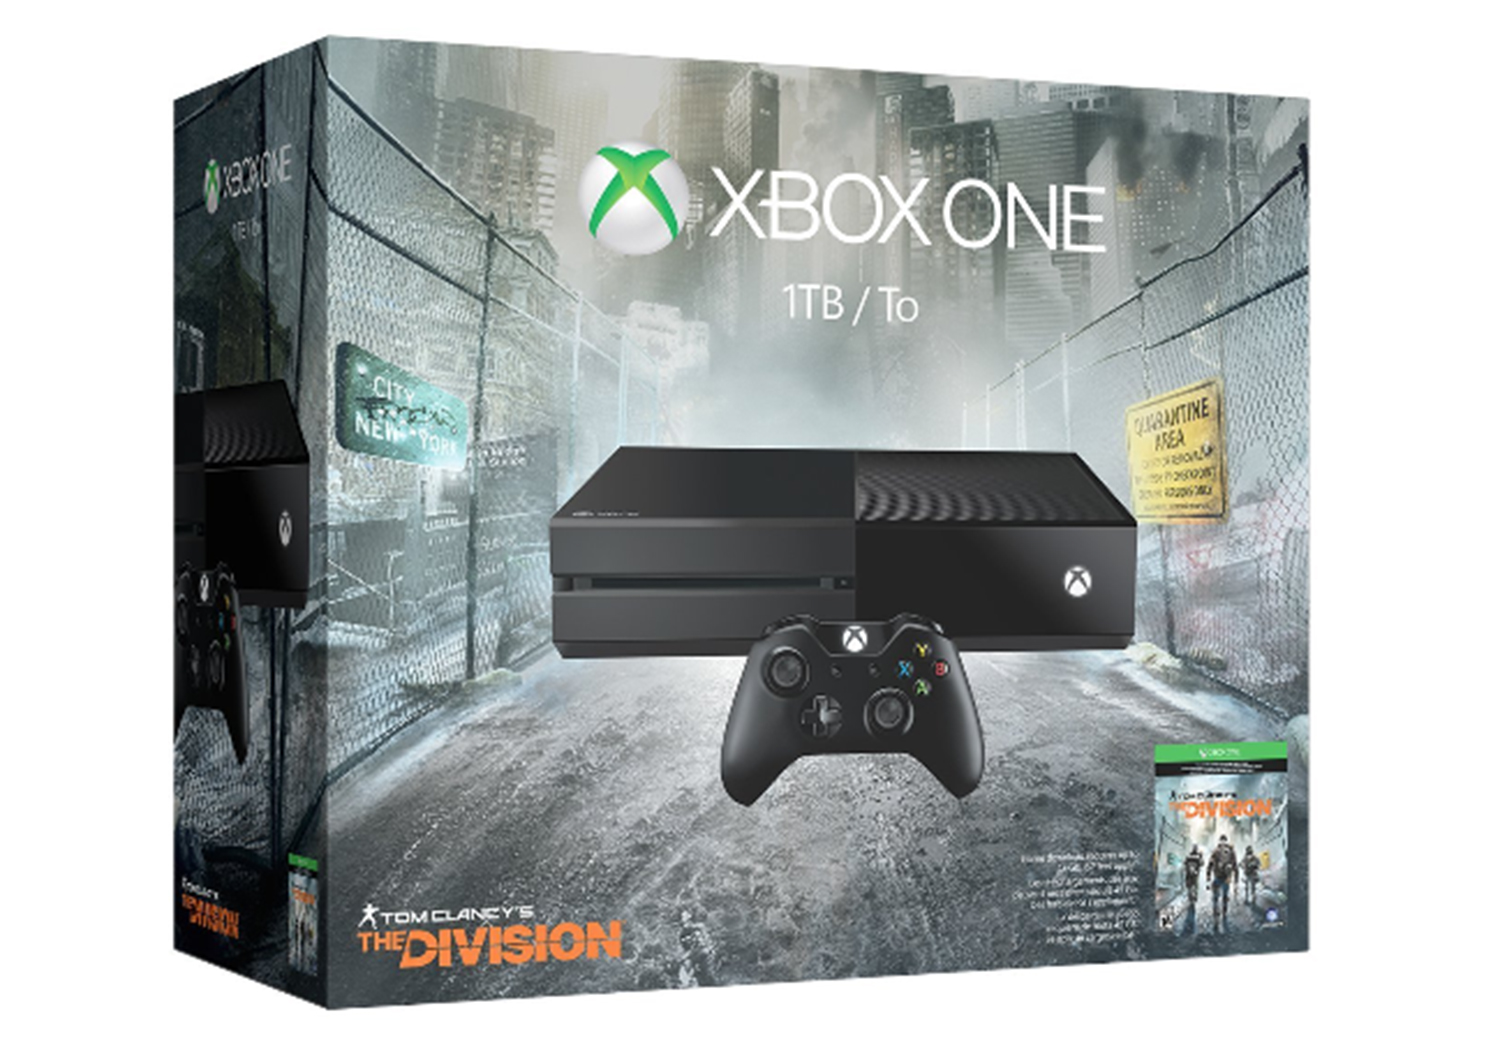 How to Turn your Microsoft Xbox One into a Development Kit